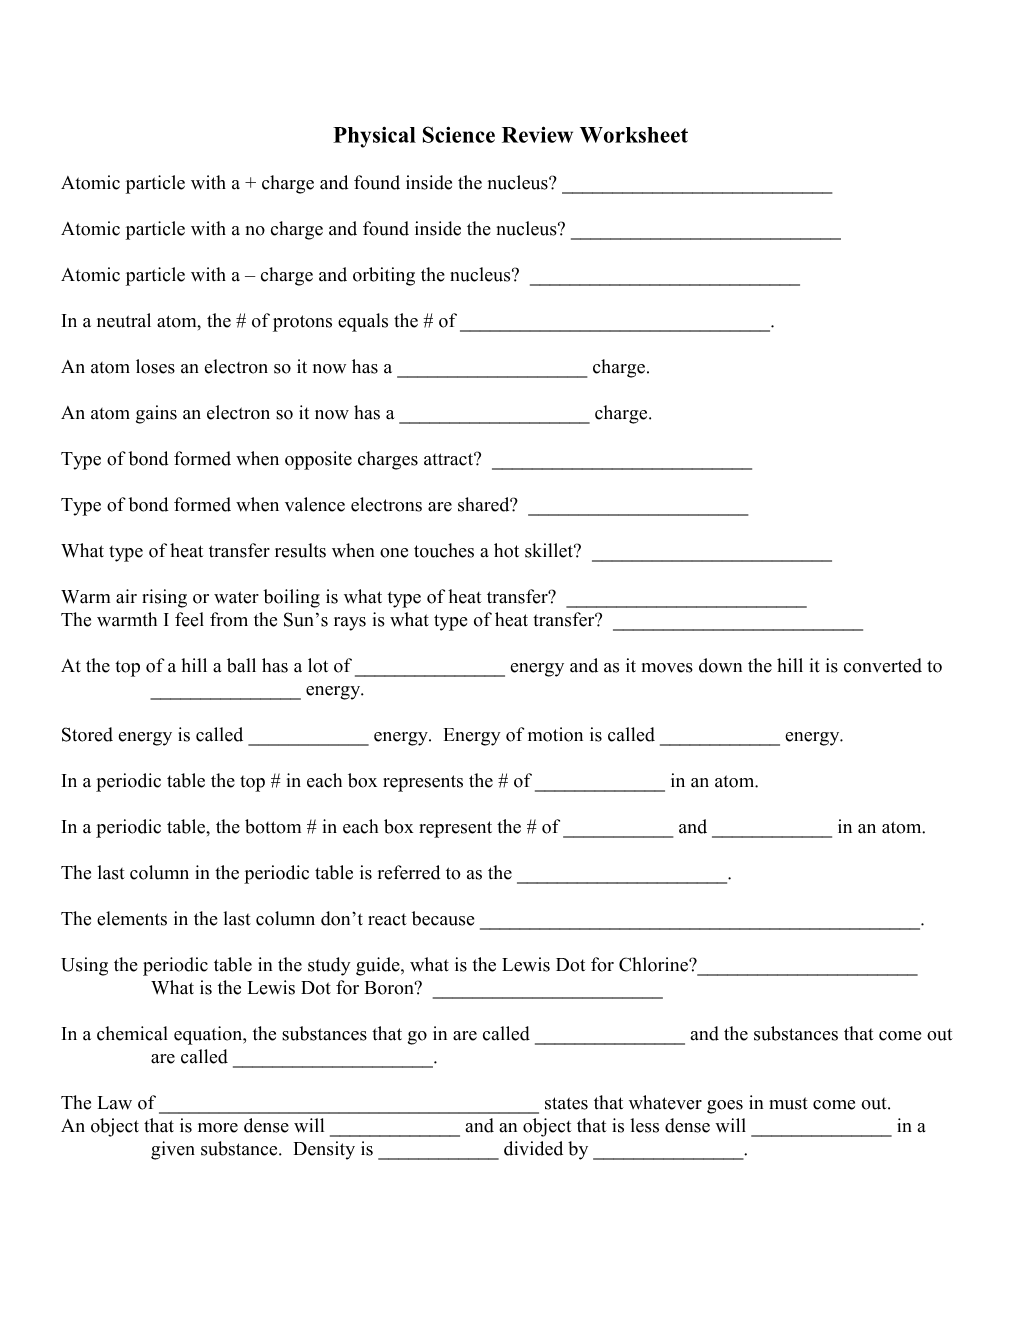 Physical Science Review Worksheet